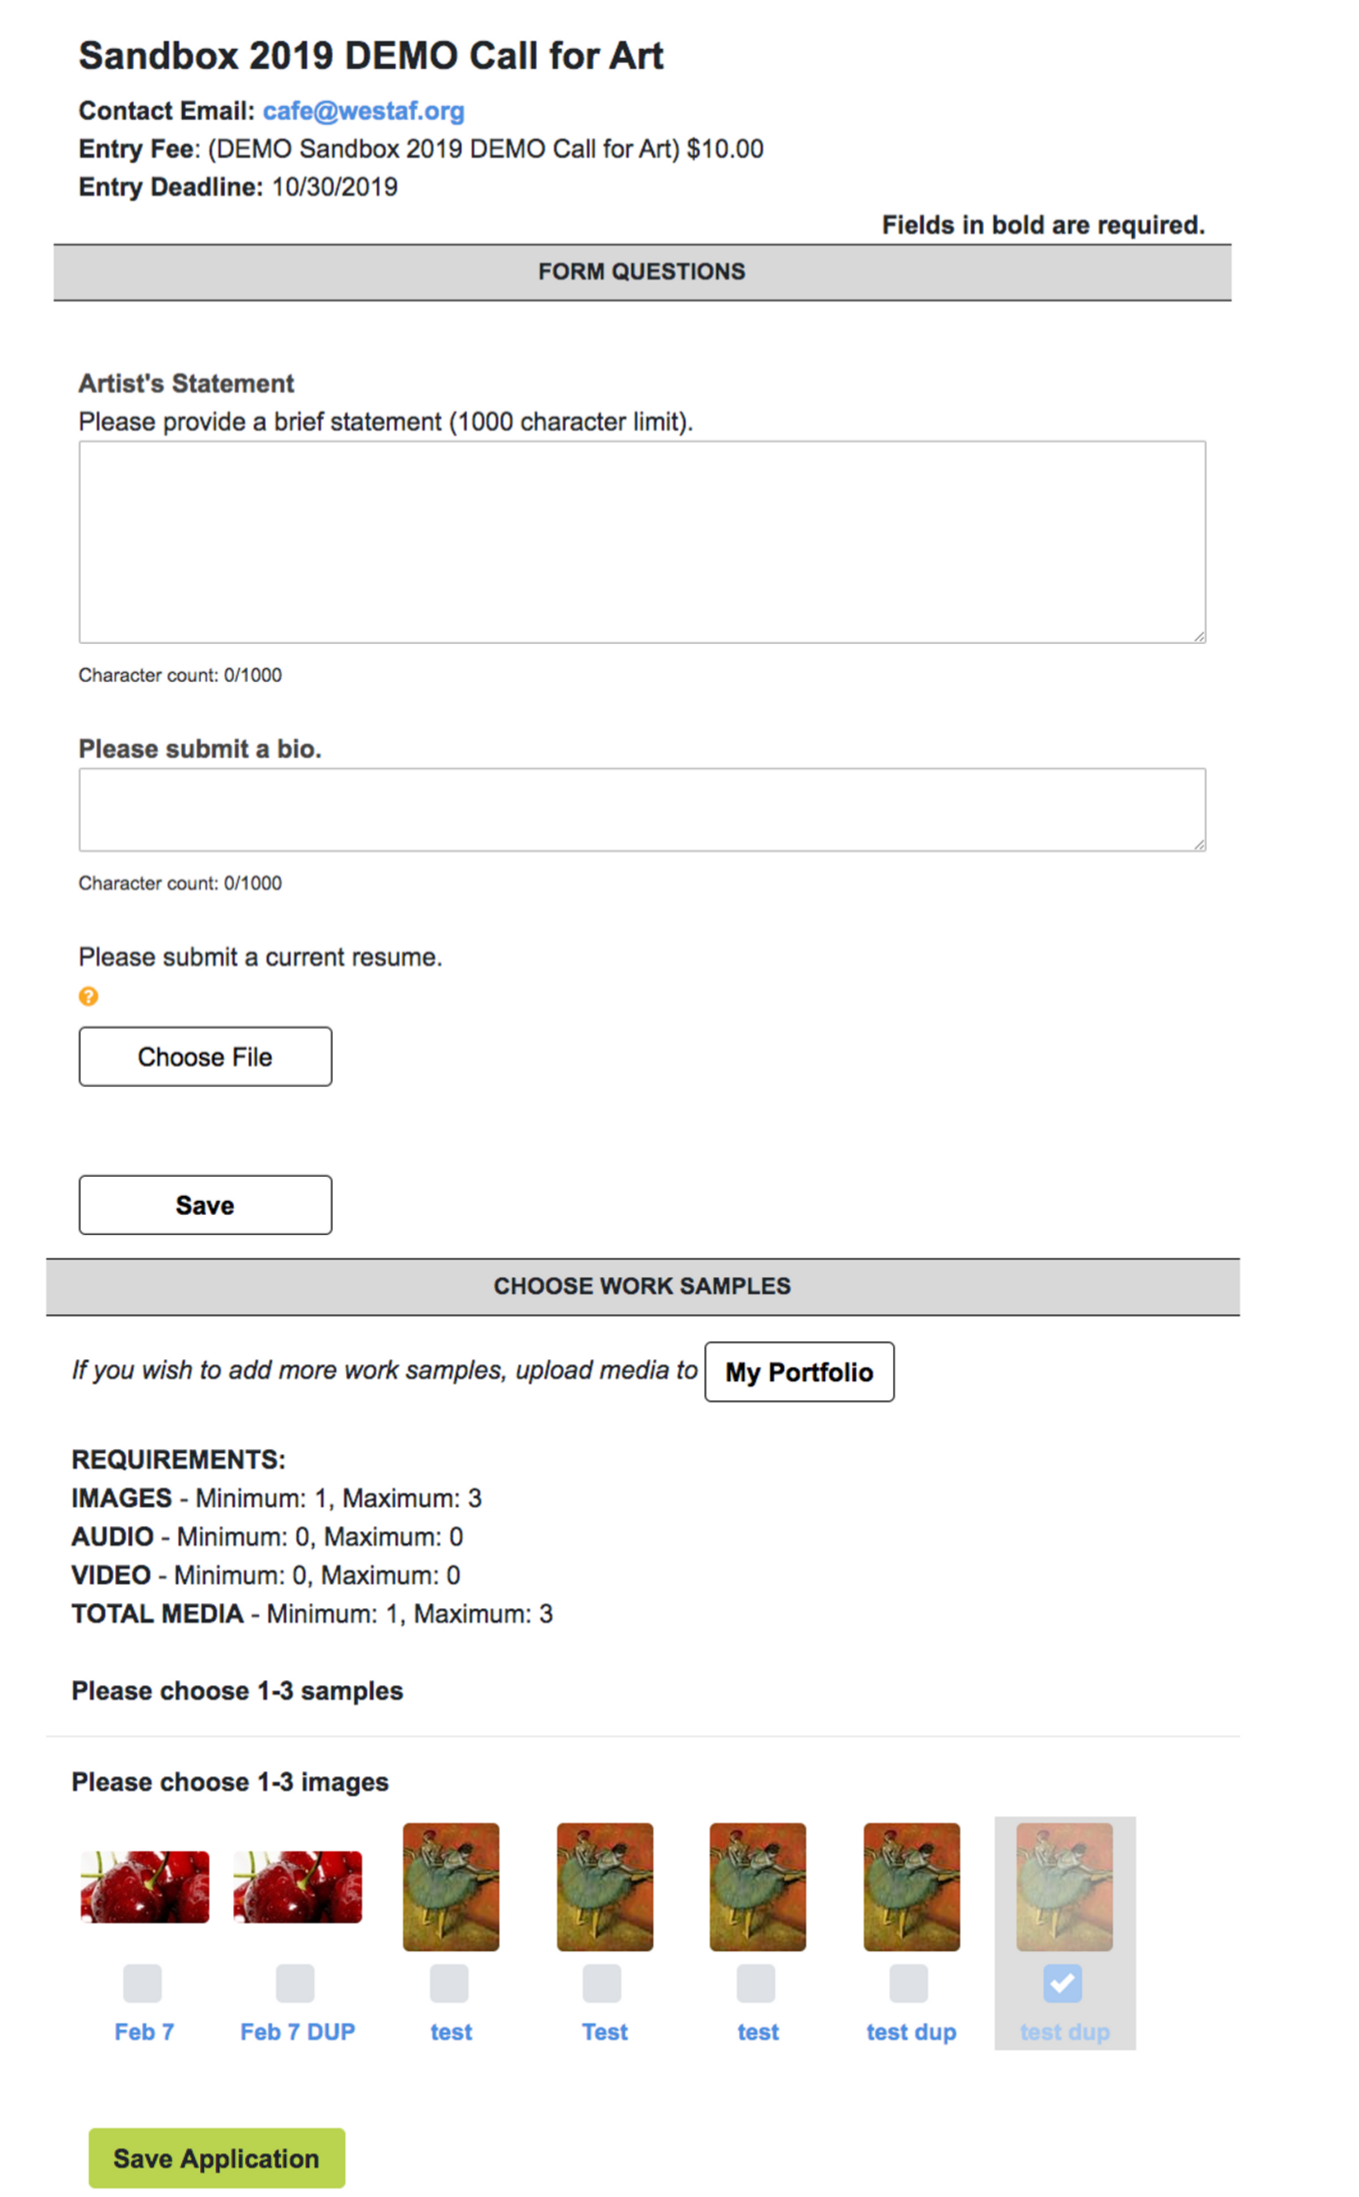 screenshot of the application form on cafe